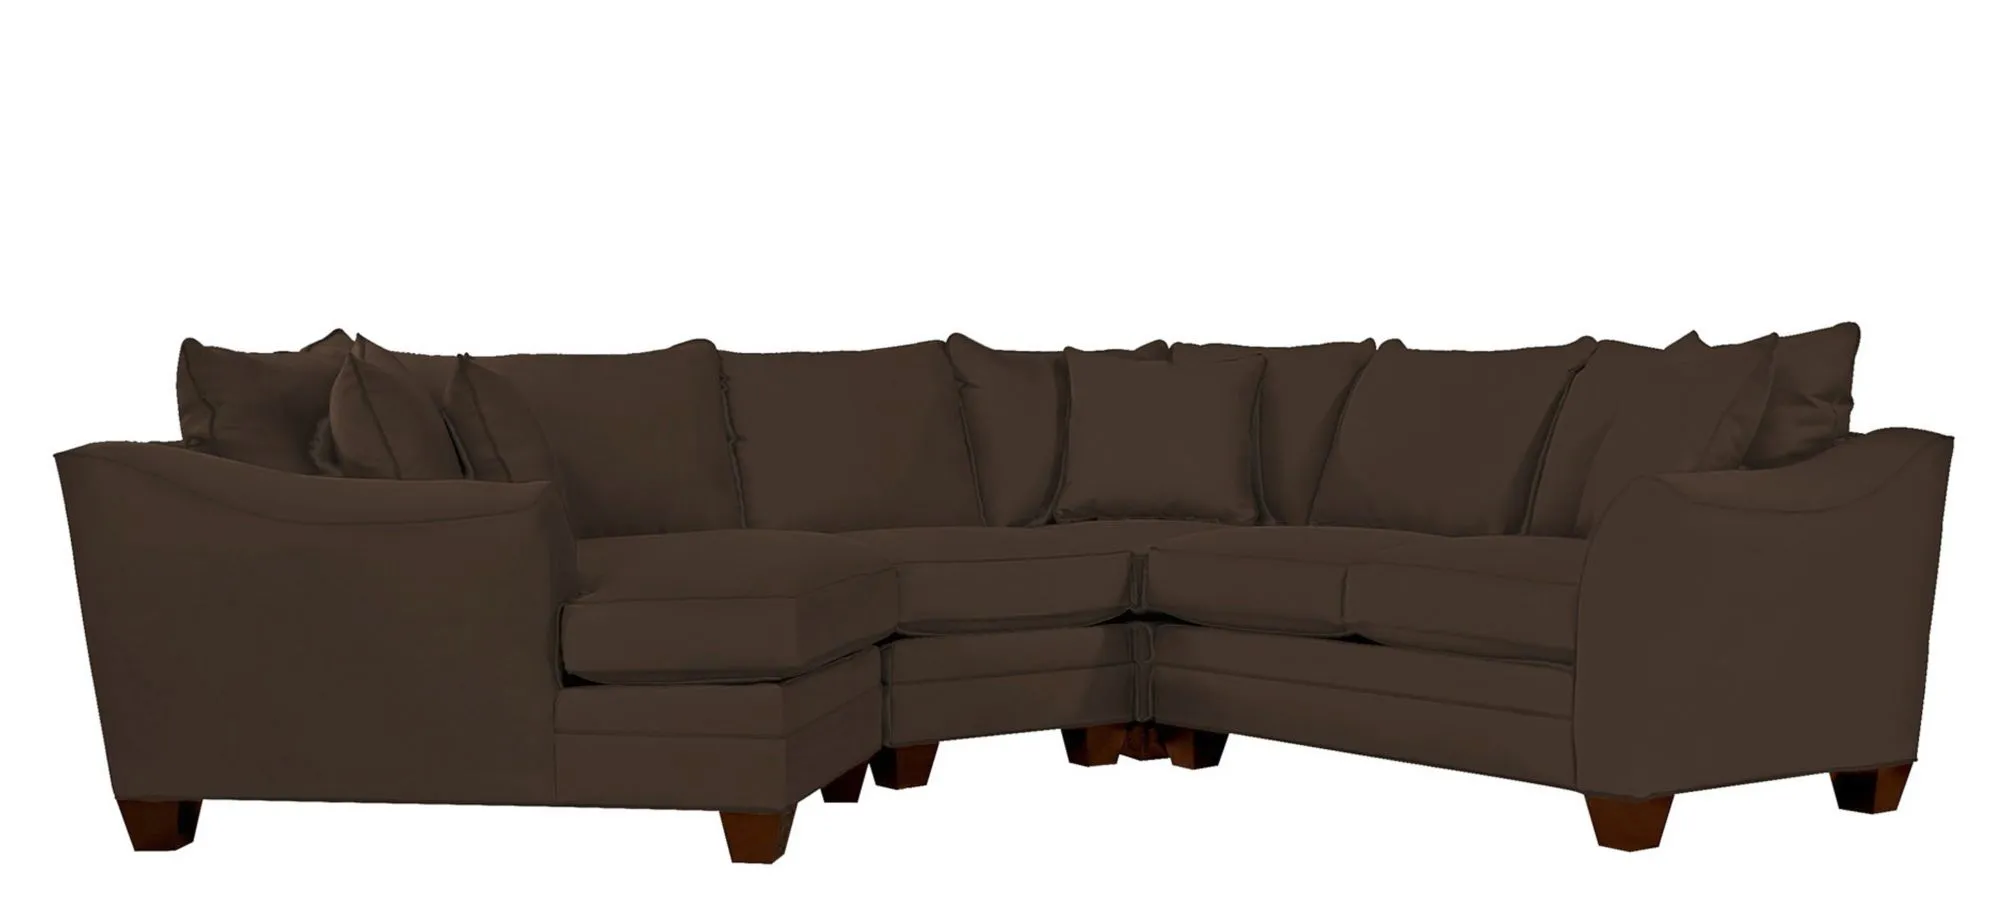 Foresthill 4-pc. Left Hand Cuddler Sectional Sofa in Suede So Soft Chocolate by H.M. Richards